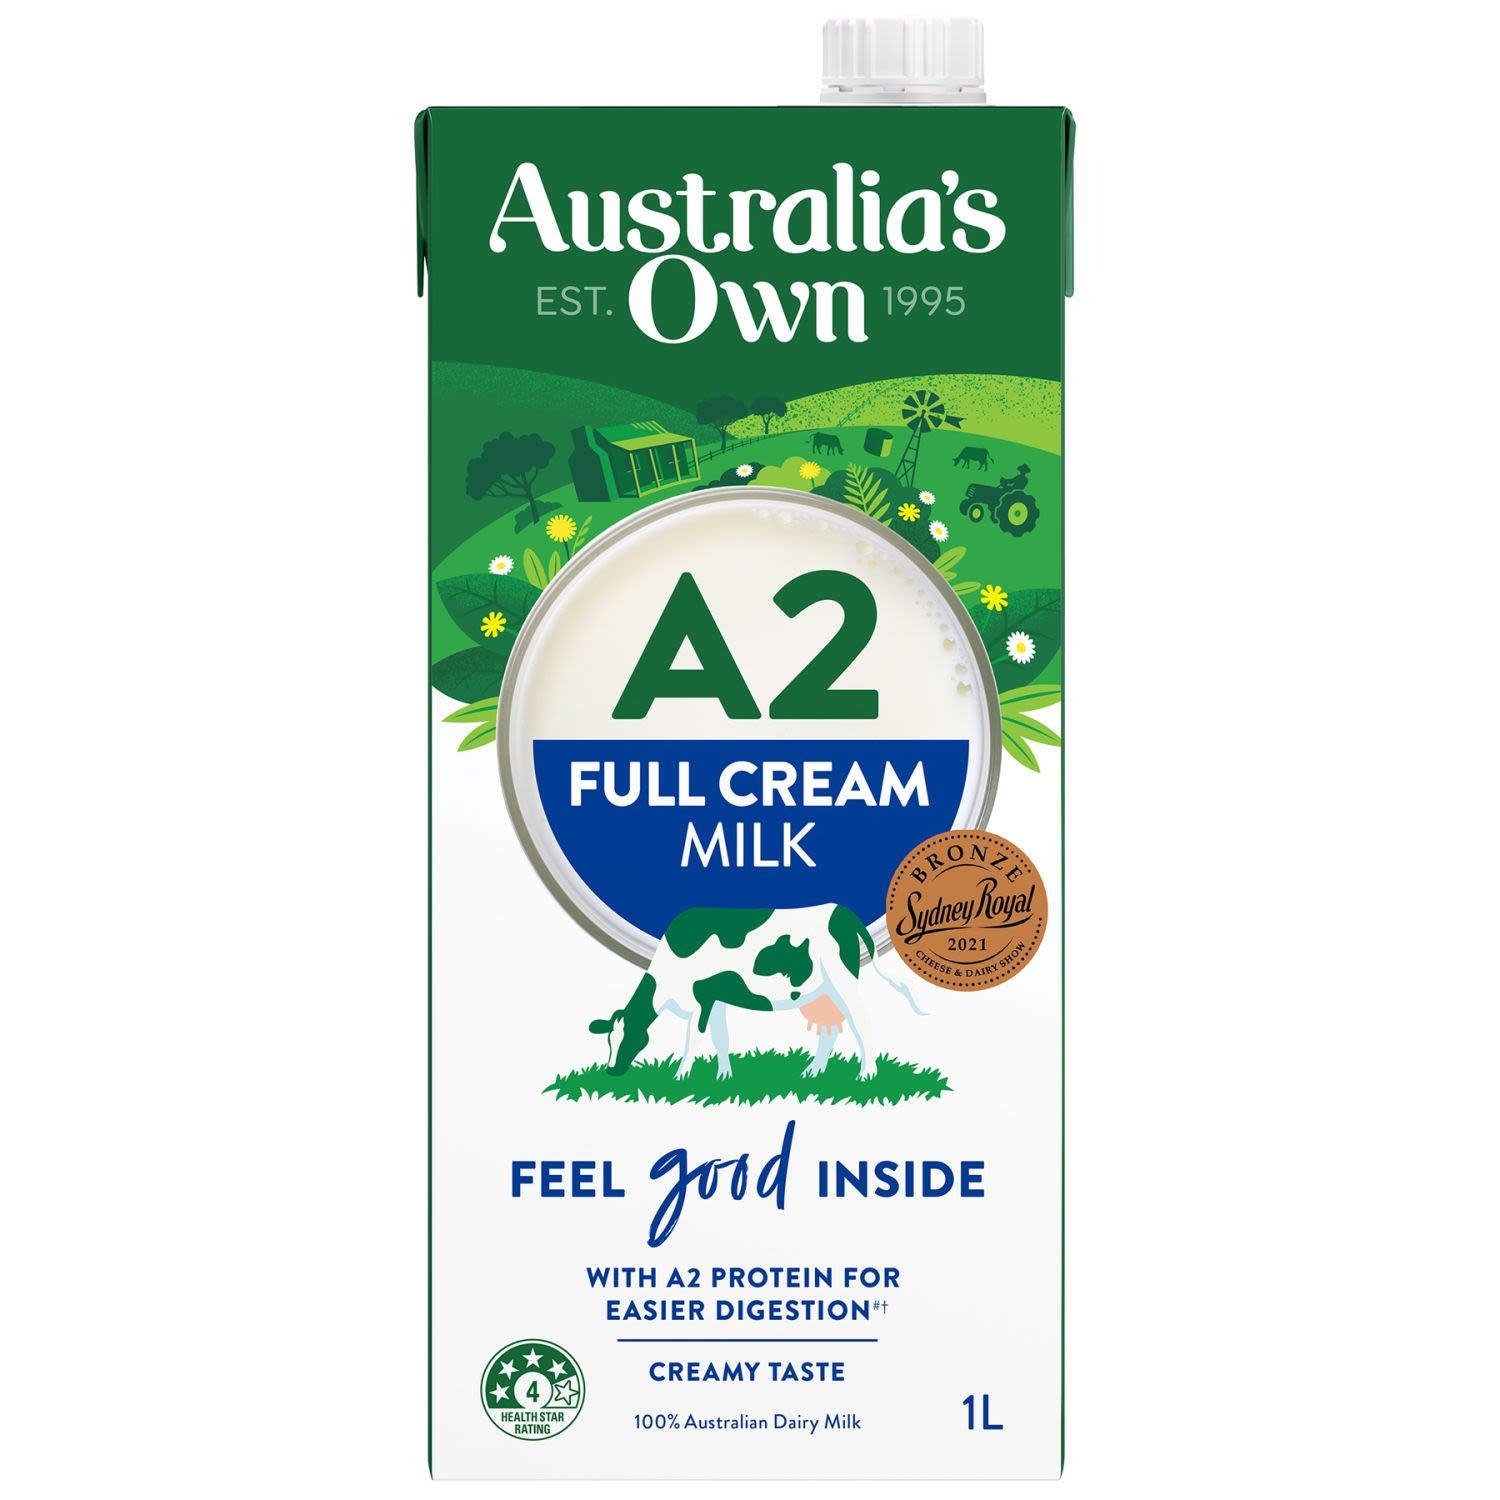 Our milk owes its goodness to the land and its caretakers.We source our milk from trusted Australian dairy farmers, then test it ourselves to ensure that it contains the A2 Protein type, and not A1.No Added Permeate.Australia’s Own is proudly part of the Freedom Foods Group family of brands.Freedom Foods Group is an Australian owned company known for making healthy and delicious foods and beverages in Australia. Our mission of ‘Making Food Better’ is something we do every day and is our promise behind every product we make.<br /> <br />